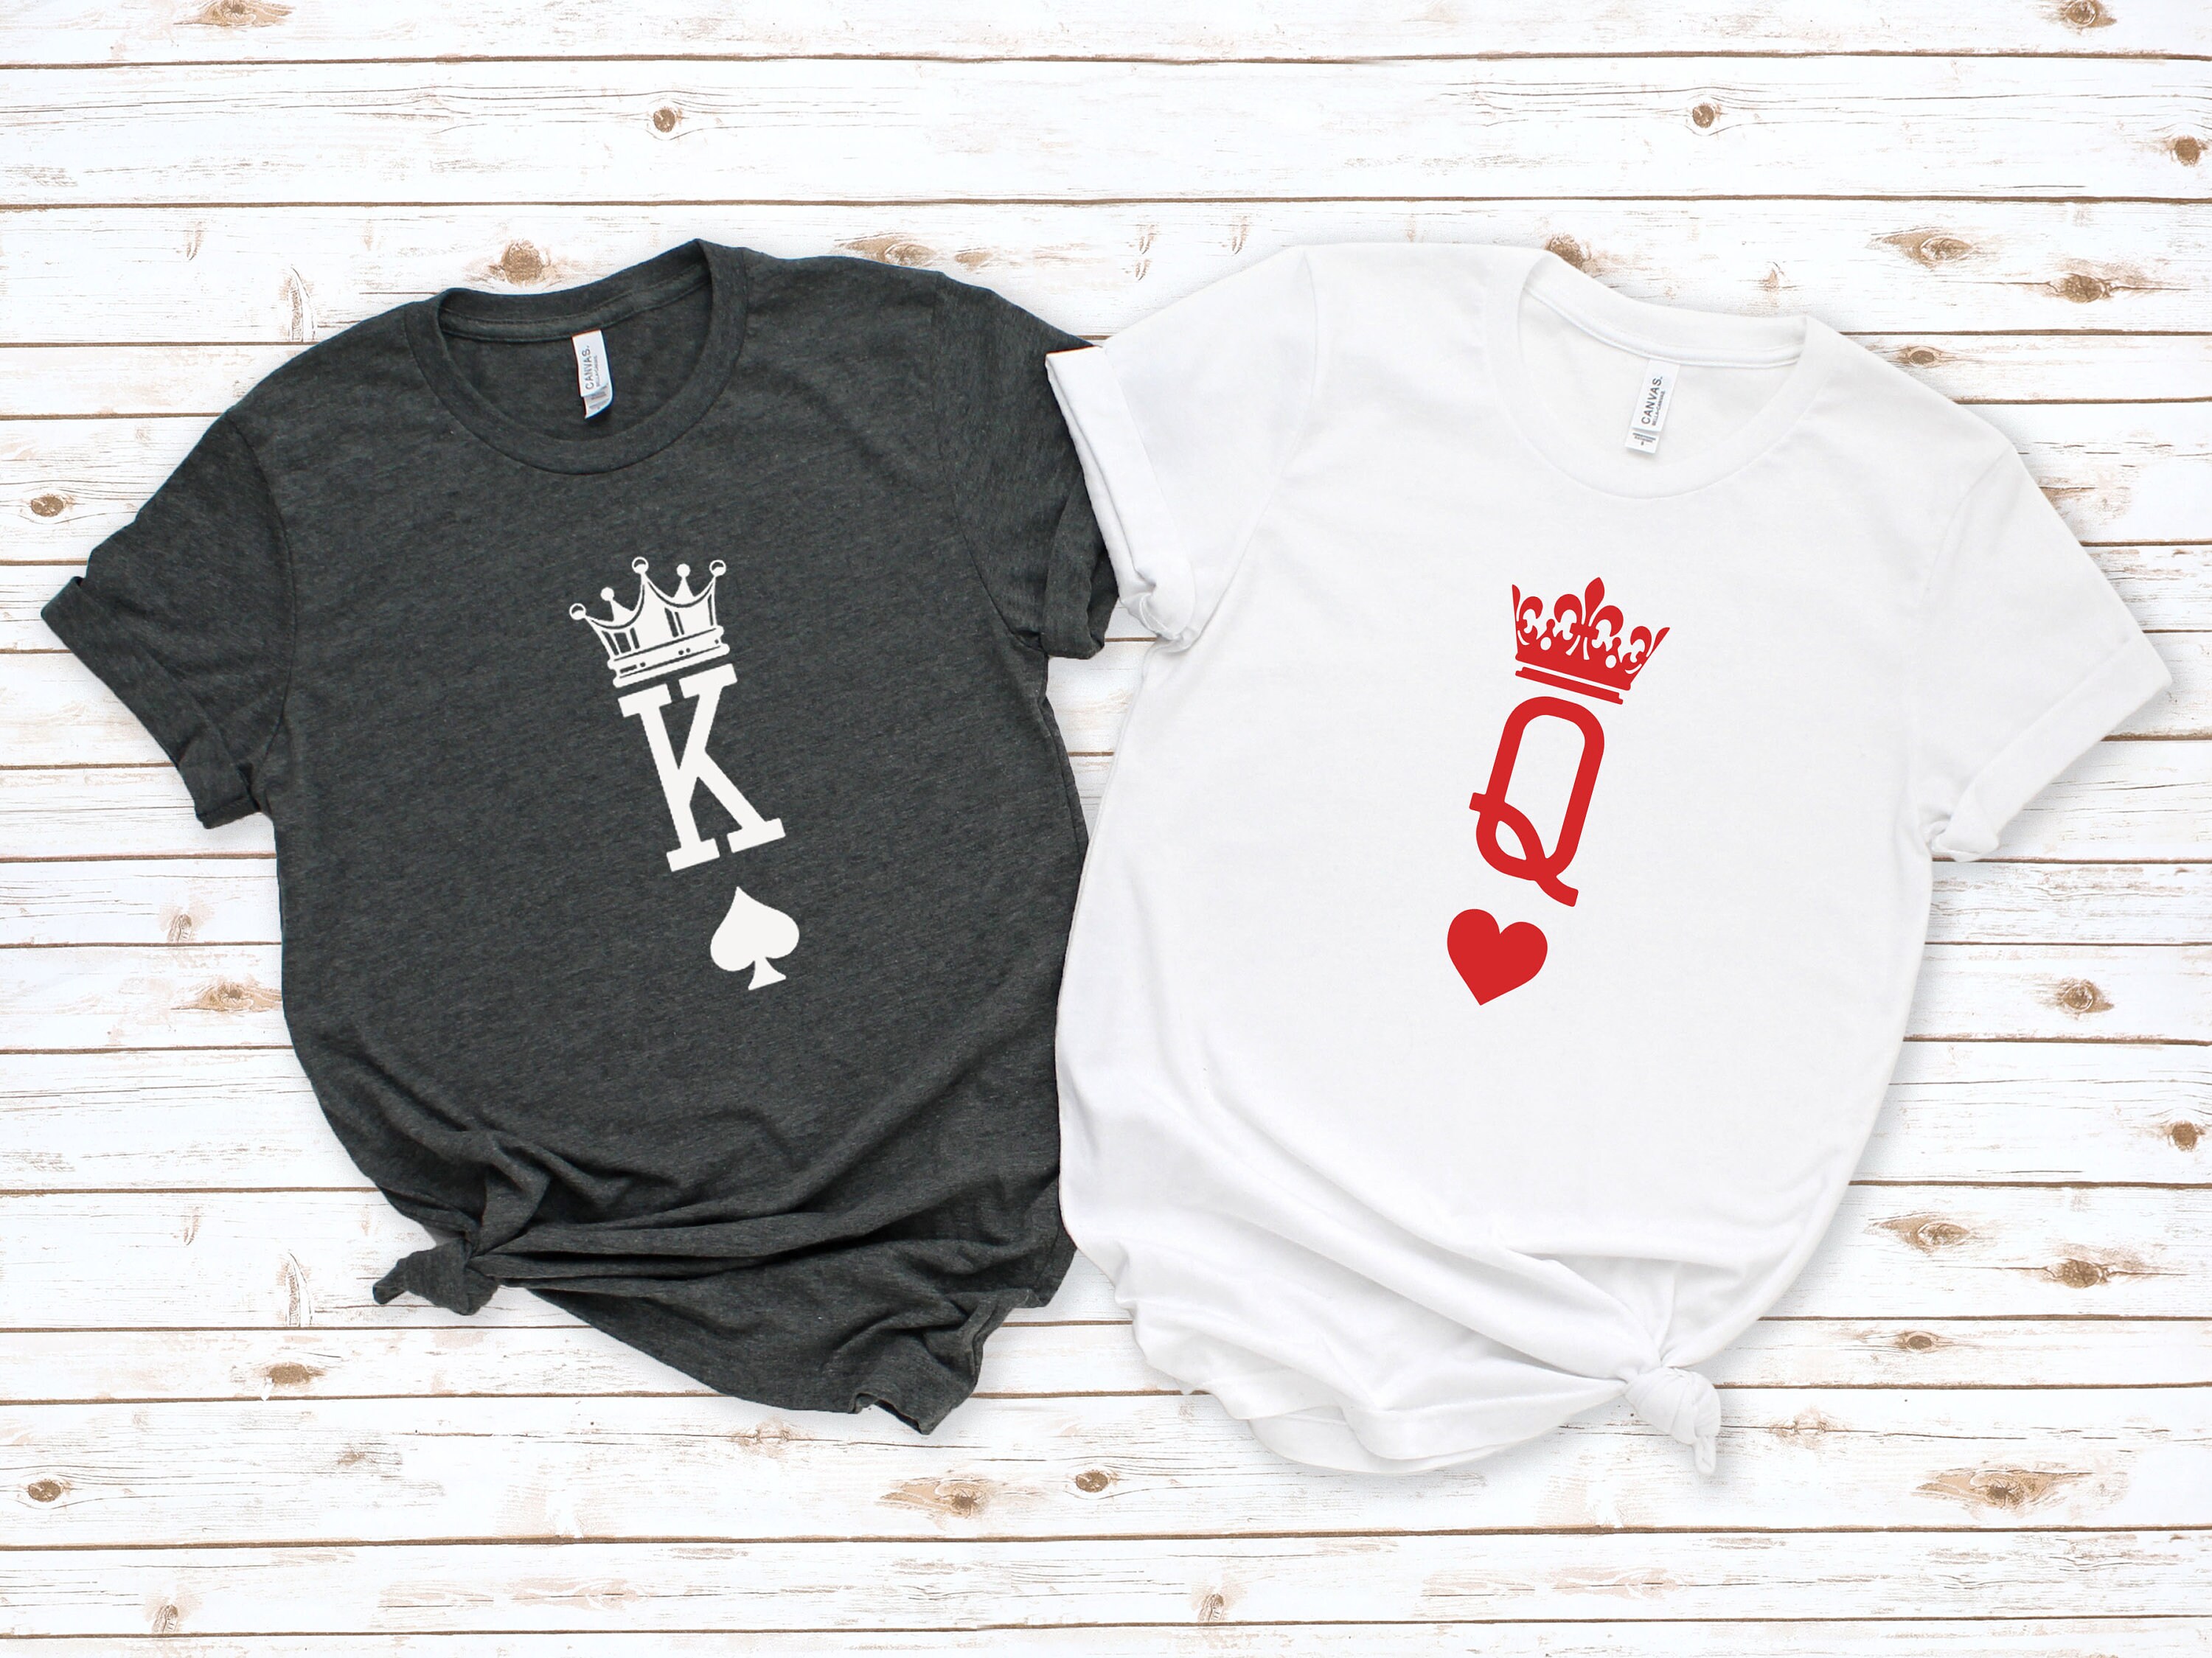 King and Queen Shirt Couple Shirts King of Spades and Queen | Etsy